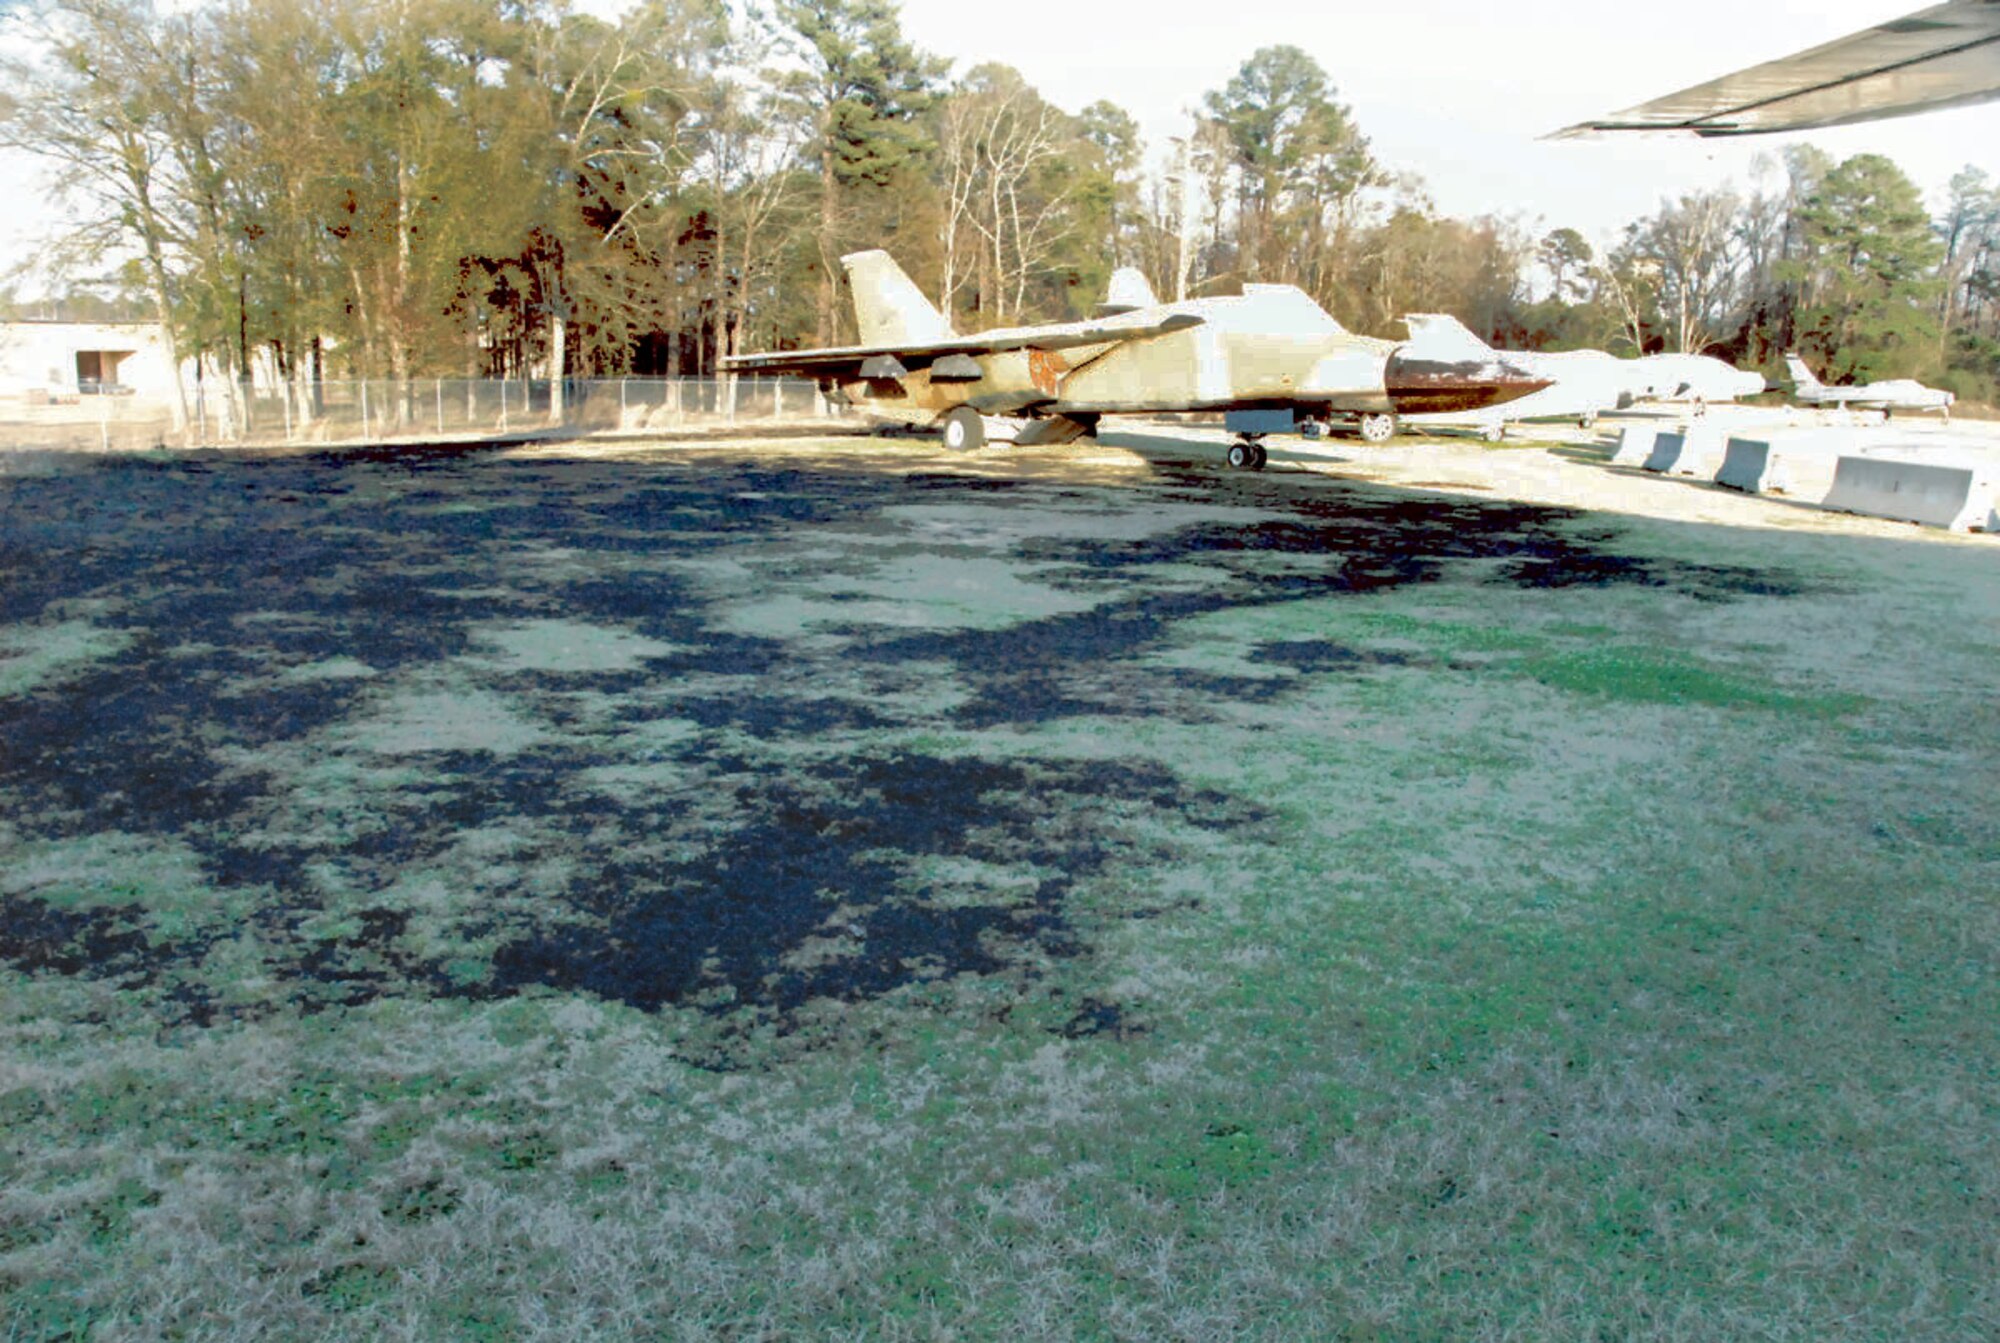 A brush fire by the Robins Parkway gate entrance was caused by burning cigarette ash. The fire spread near an aircraft display on the Museum of Aviation grounds.
U.S. Air Force photo by RAYCRAYTON